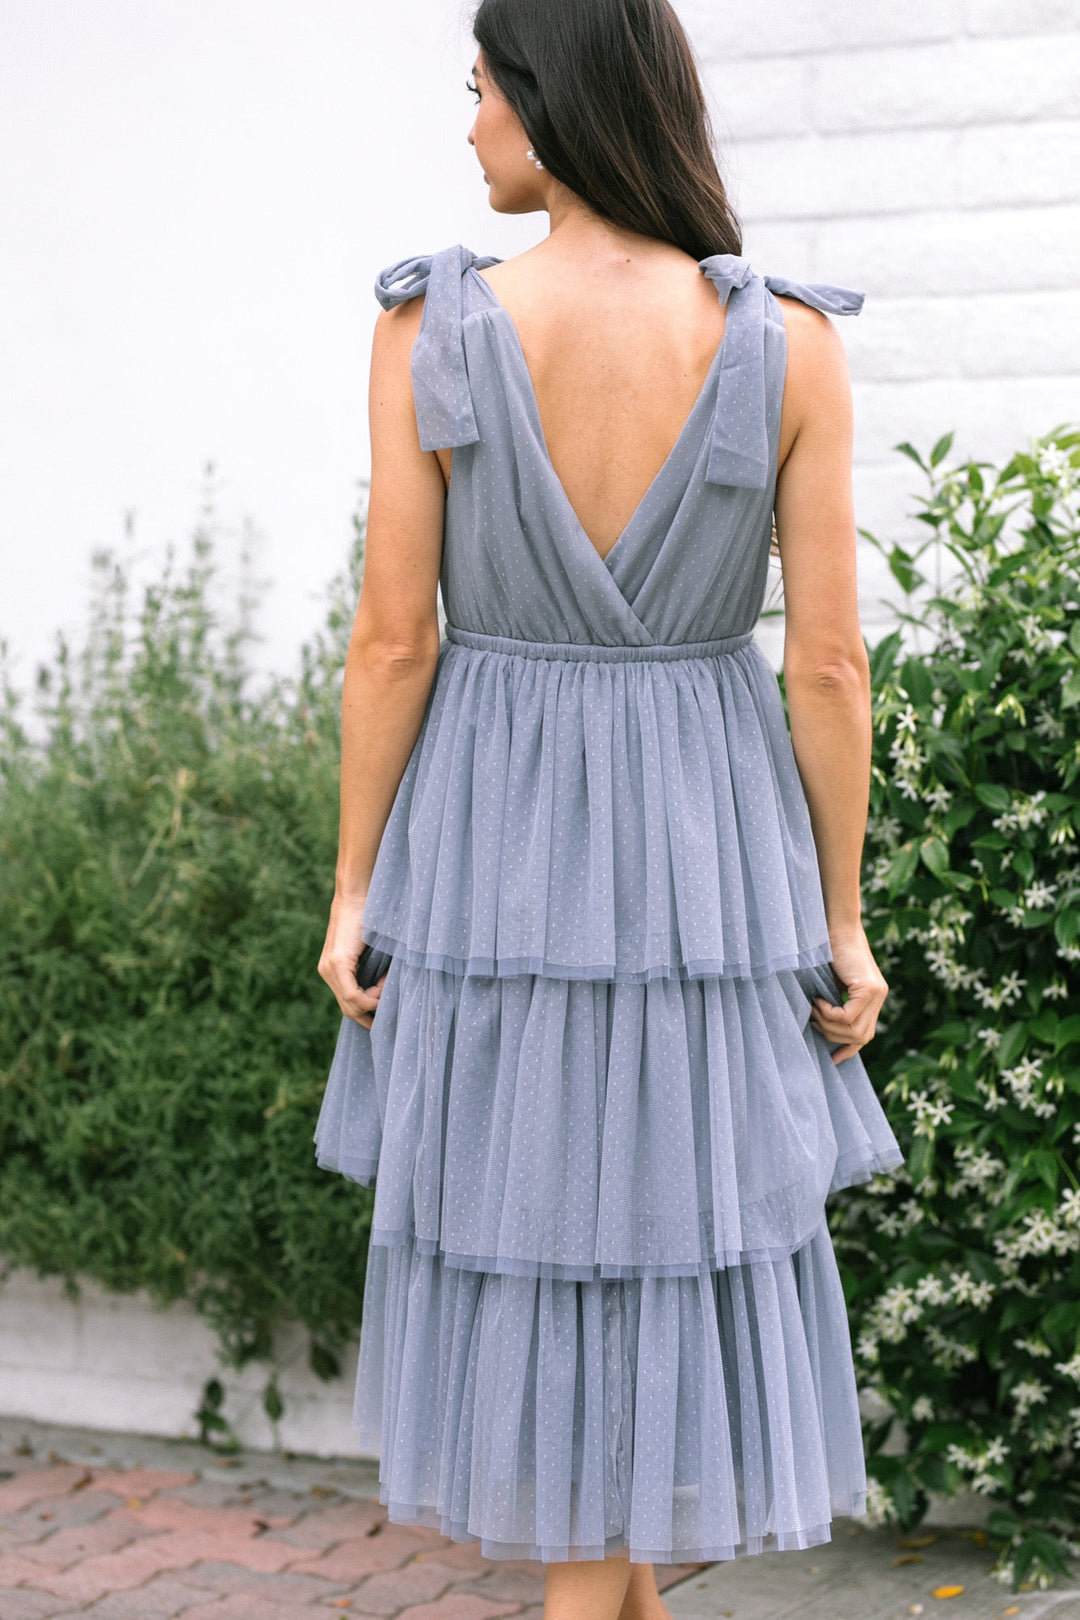 Layered tulle dresses: the definitive daytime trend - LaiaMagazine